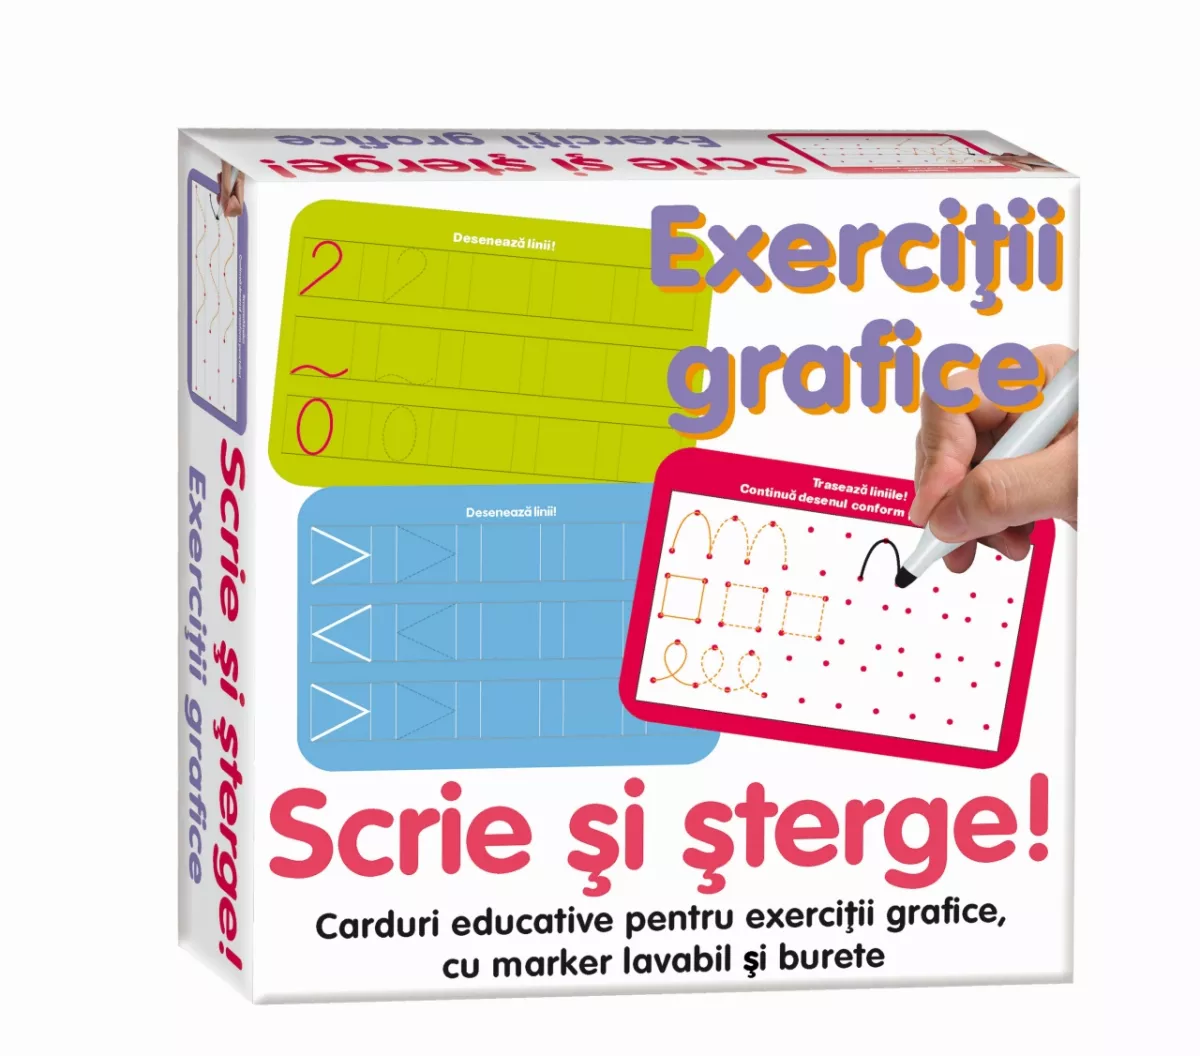 Scrie si sterge exercitii grafice